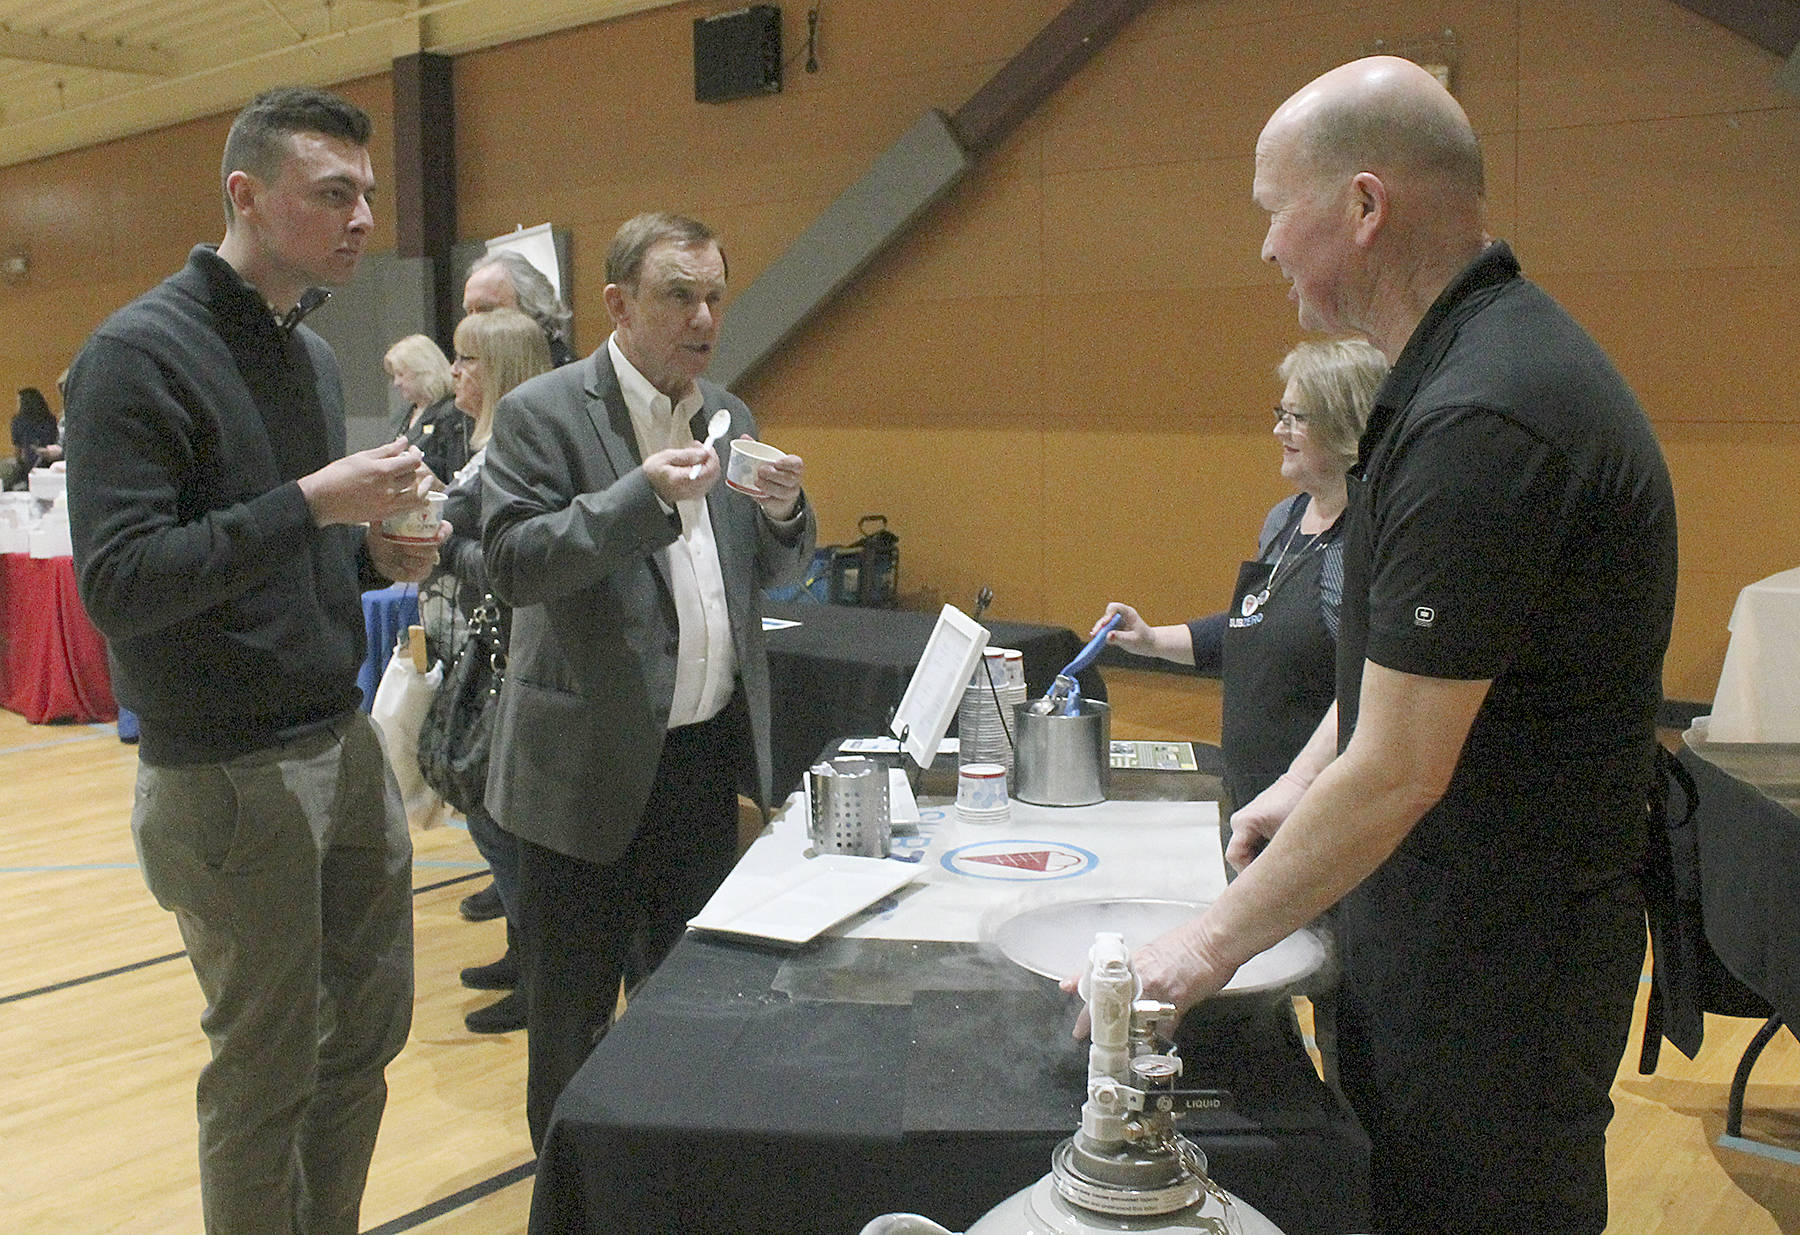 King County Councilman Pete von Reichbauer, center, and his legislative staff director Tyler Pichette, left, enjoy ice cream while talking to Sub Zero Ice Cream owner Jack Walsh and his wife, Judy, at the Best of Federal Way reception Wednesday at the Federal Way Community Center. Walsh and his wife mixed up ice cream using liquid nitrogen at one of the vendor booths at the event. Jessica Keller, the Mirror